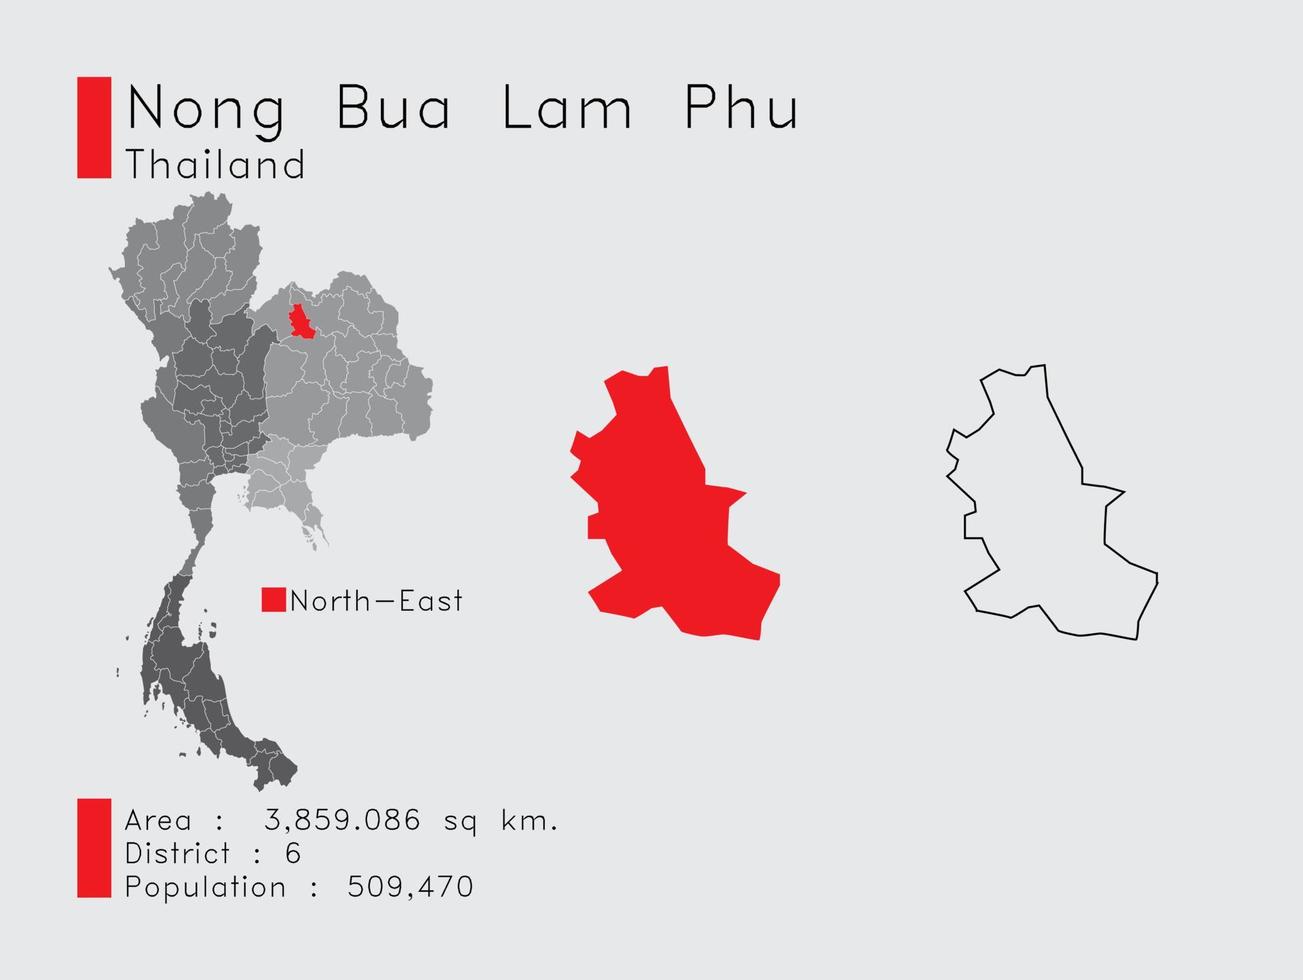 Nong Bua Lam Phu Position in Thailand A Set of Infographic Elements for the Province. and Area District Population and Outline. Vector with Gray Background.